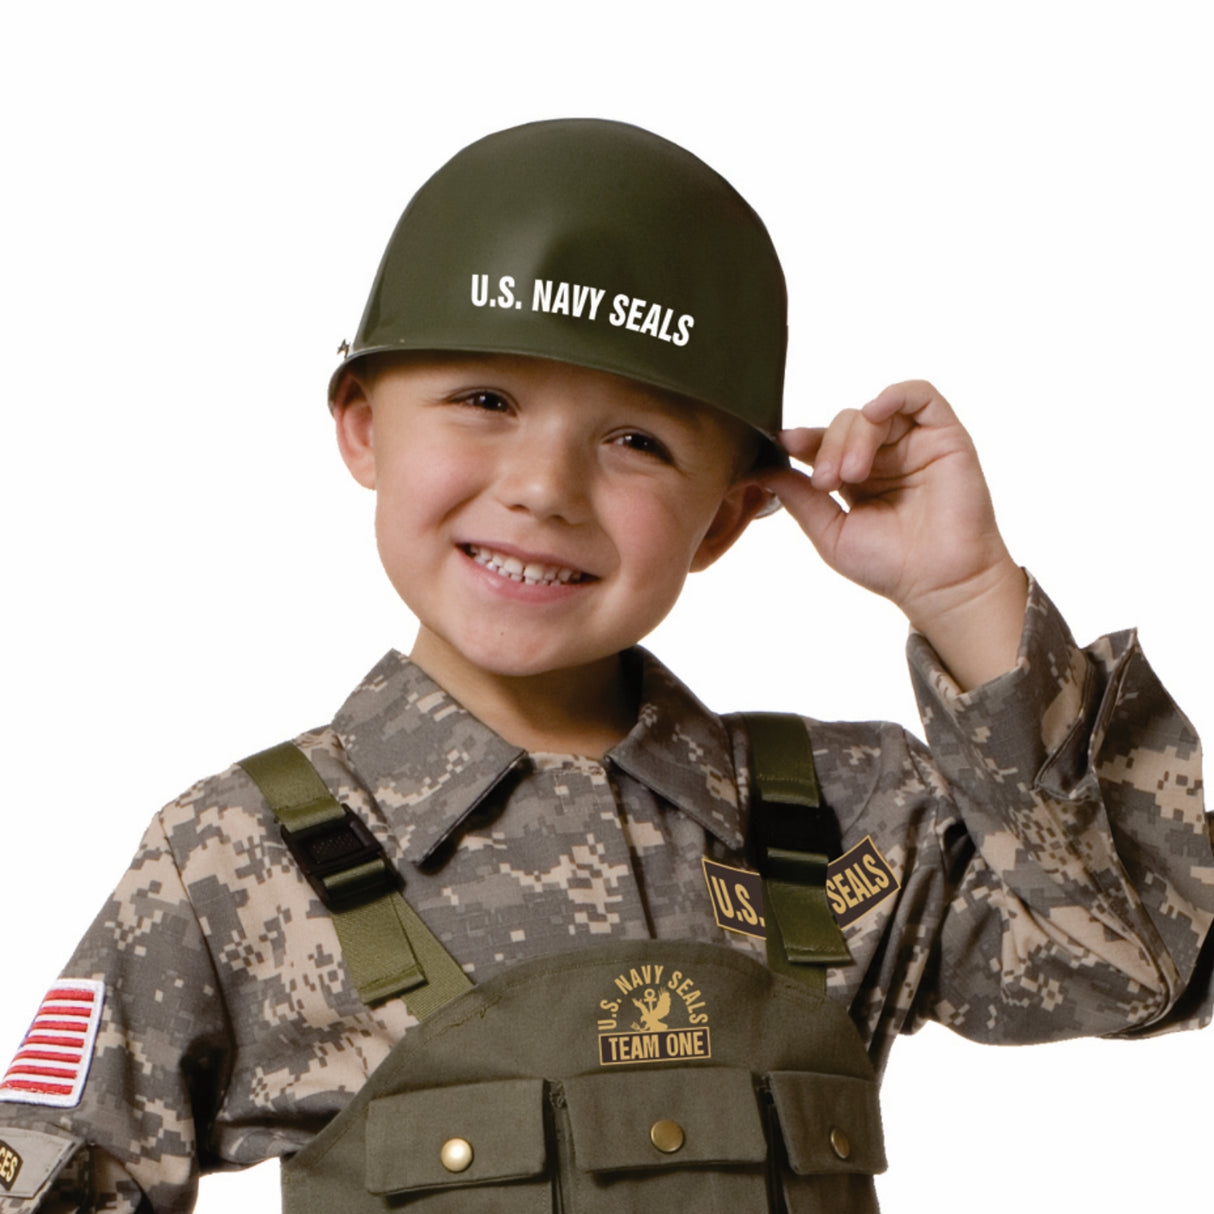 Army Special Forces Helmet - Kids